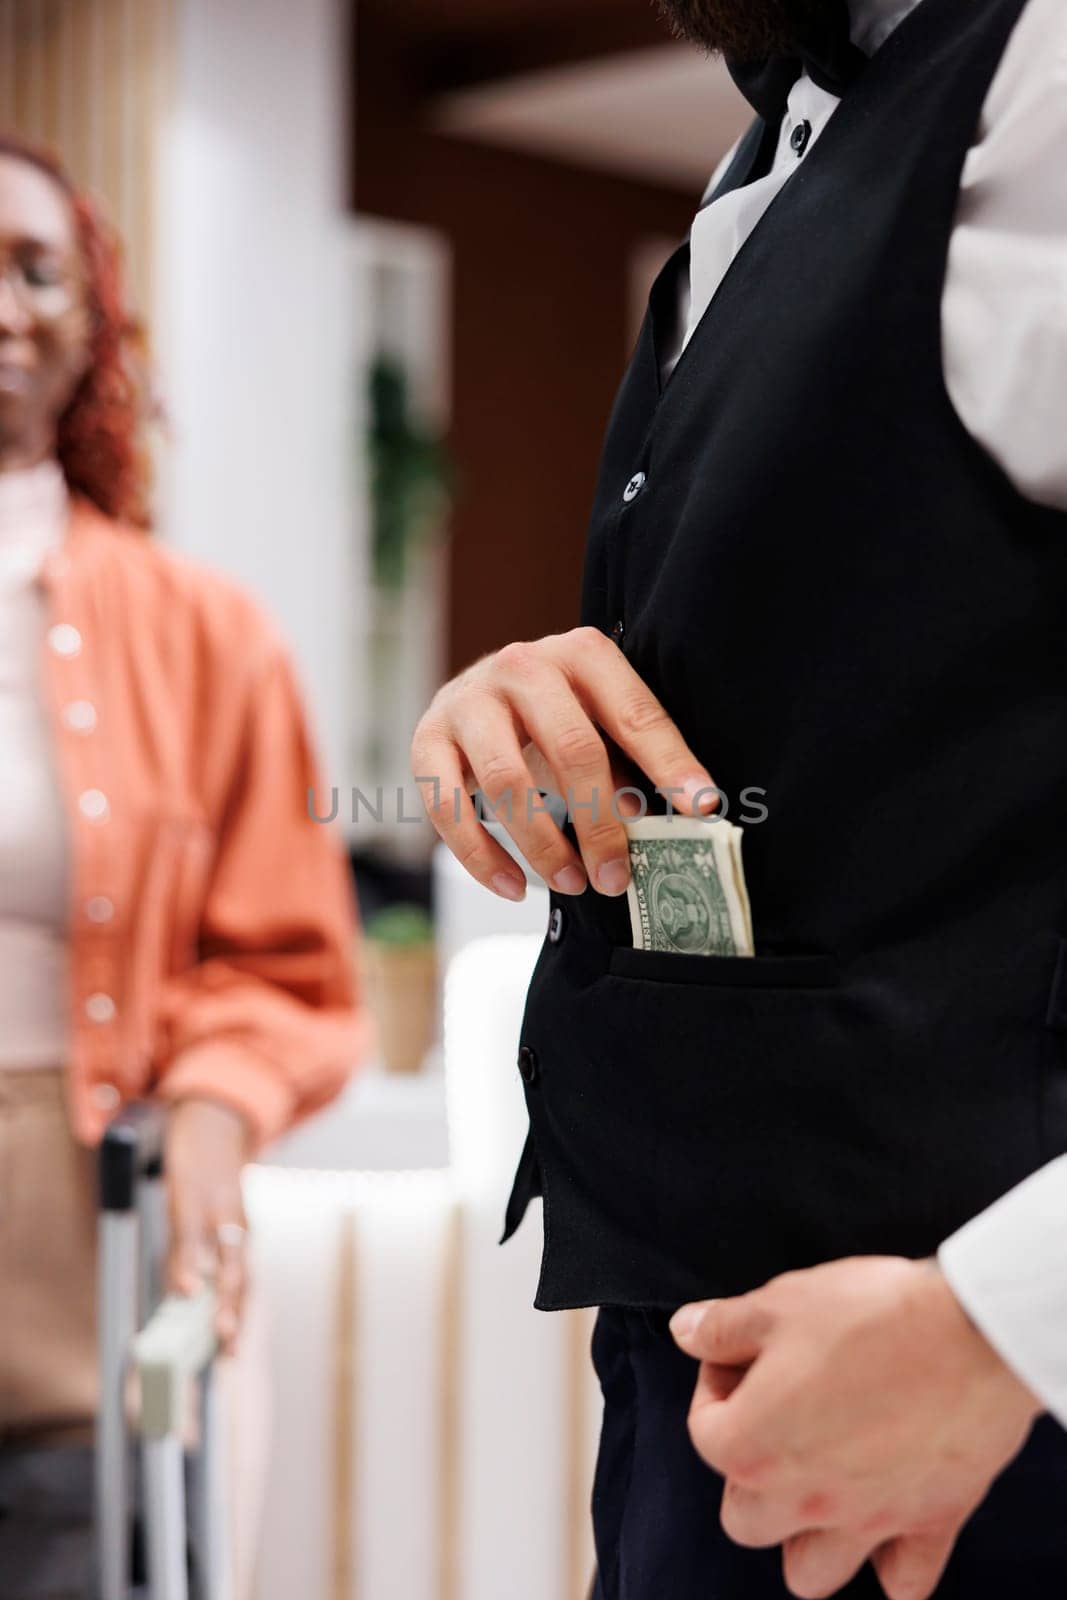 Bellboy accepting cash from people, putting money in pocket and carrying suitcases for hotel guests. Male steward working as concierge taking tip from tourists, luxury service. Close up.